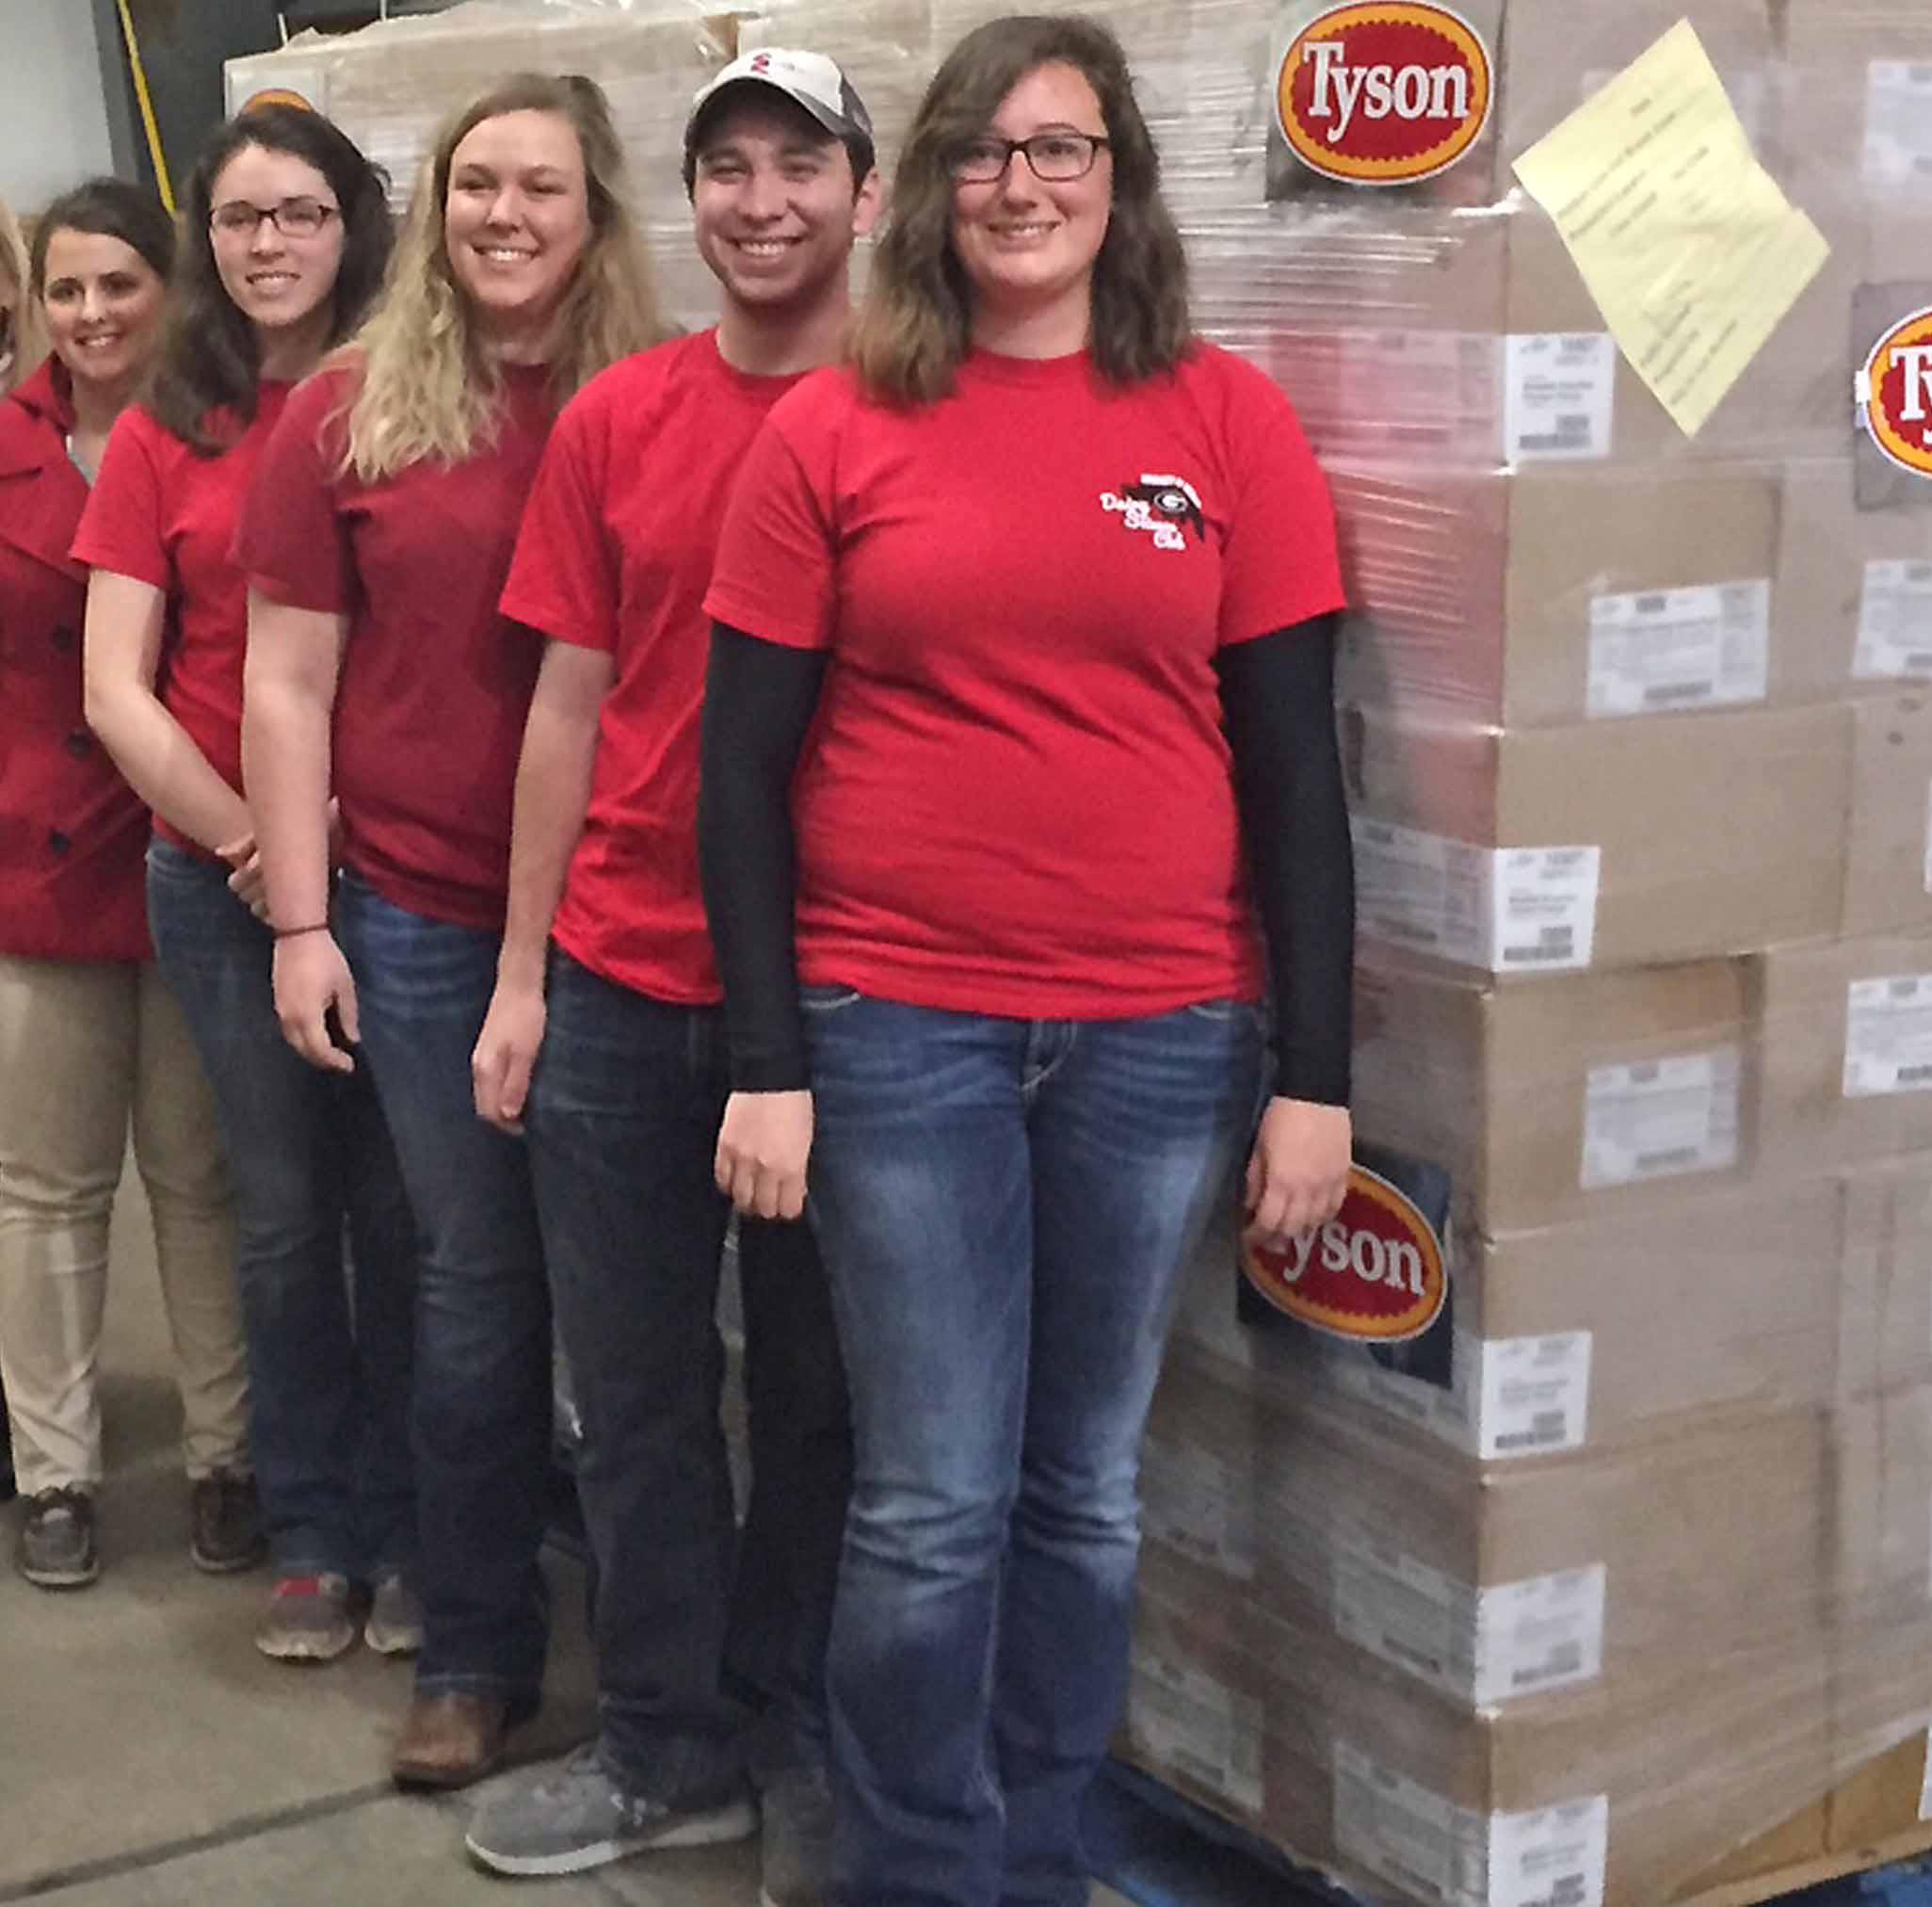 Animal Agriculture Alliance President Kay Johnson Smith and Chairman Paul Pressley work with members of the UGA Dairy Science Club, from left, Madison Rose, Hayleigh Boyd, Joseph Seta and Lark Widener, to deliver 30,400 pounds of chicken to the Food Bank of Northeast Georgia. The chicken was provided by Tyson Foods as part of a national food drive contest.